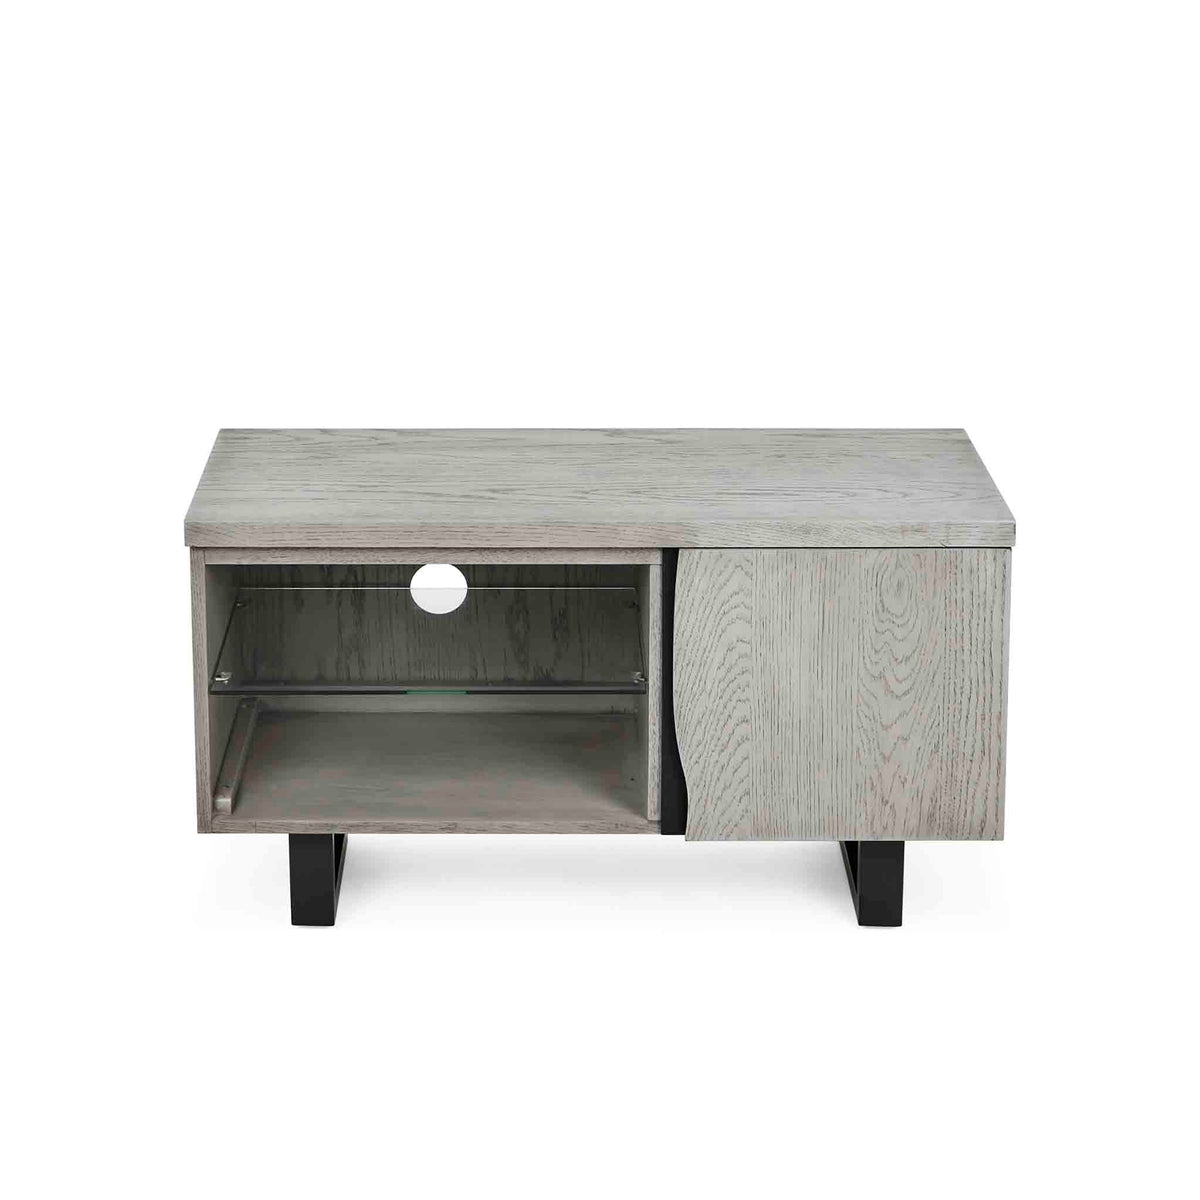 Soho Small 90 cm TV Stand - Front view with top showing